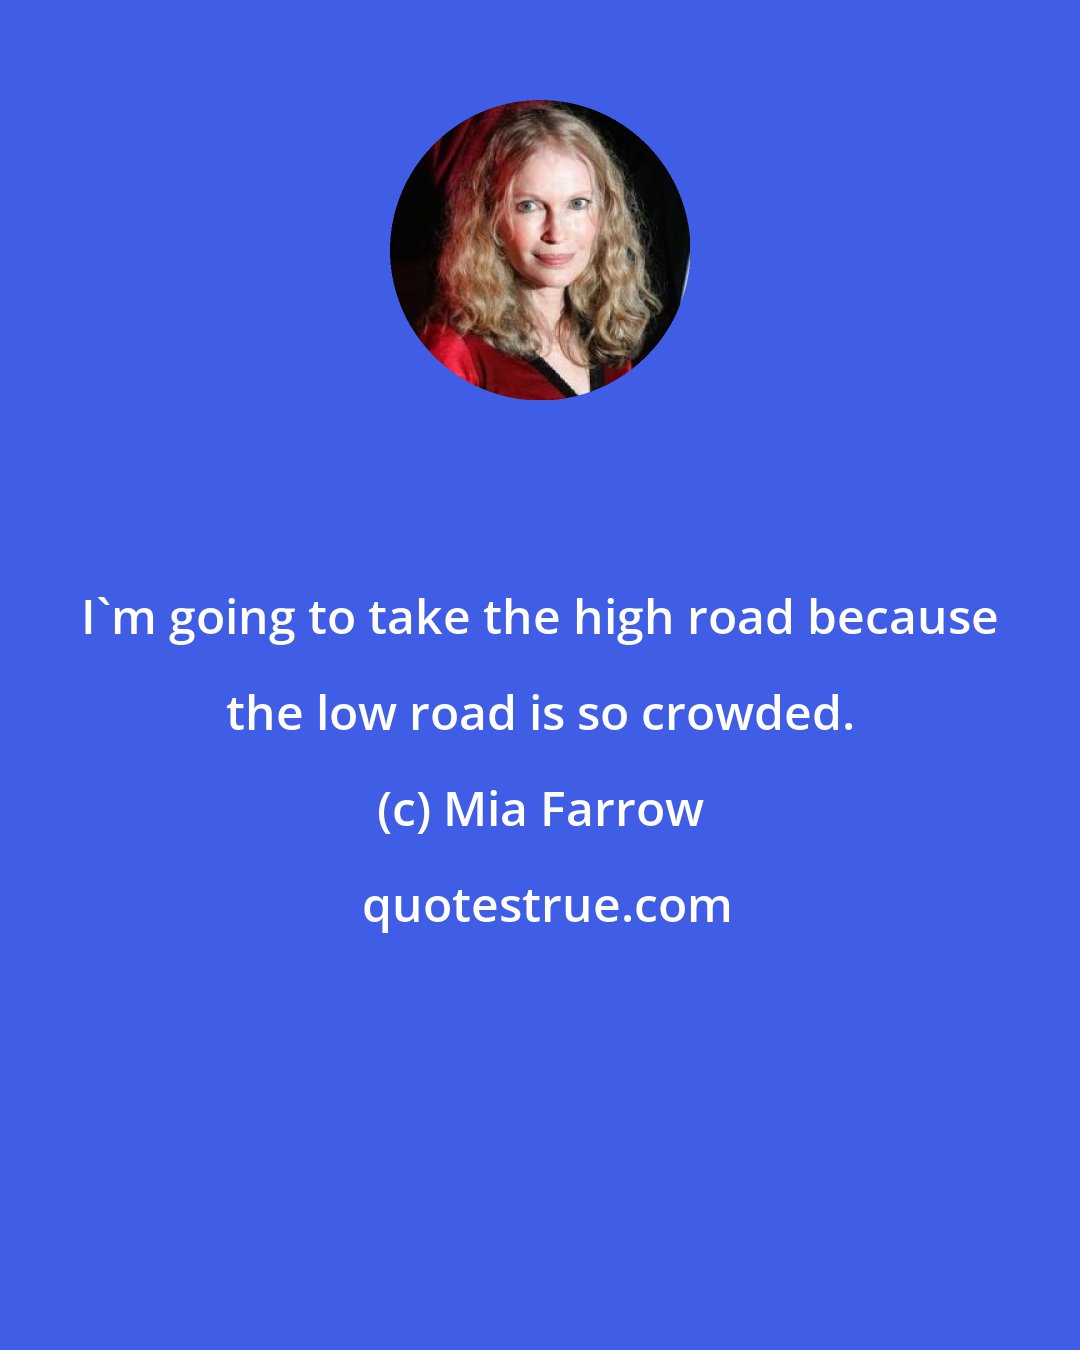 Mia Farrow: I'm going to take the high road because the low road is so crowded.